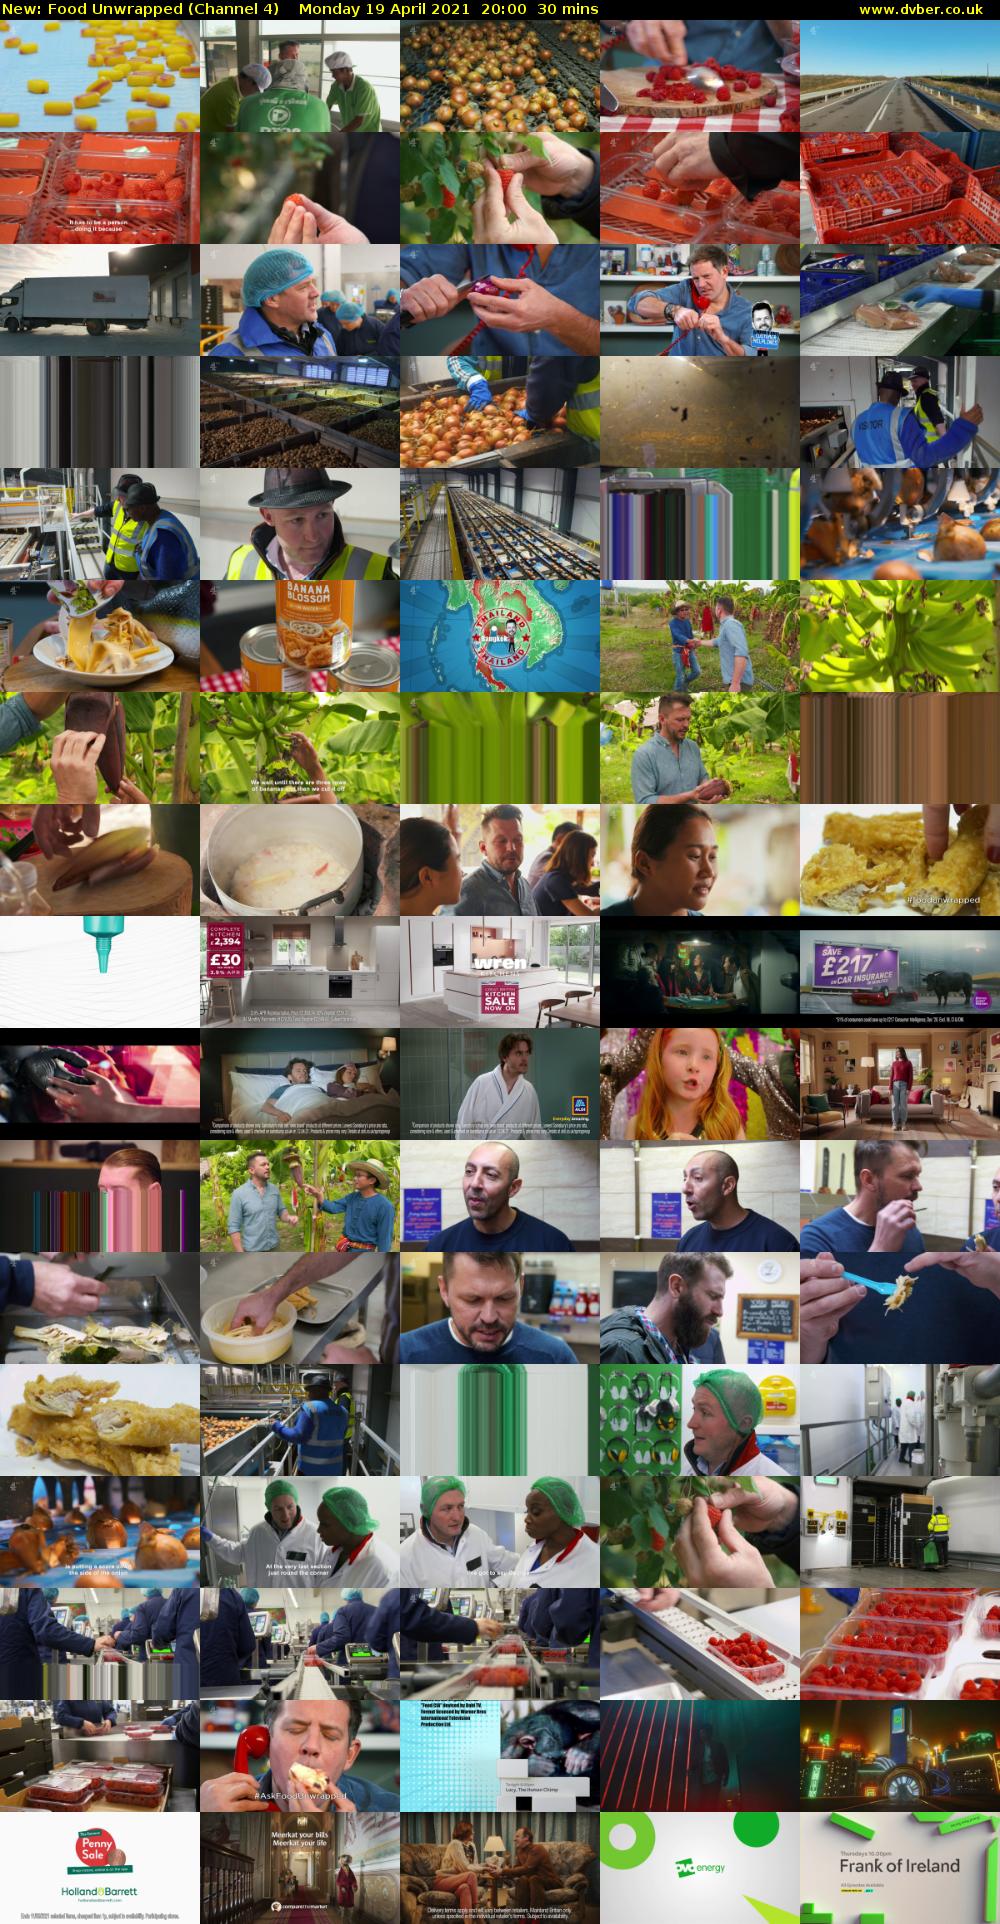 Food Unwrapped (Channel 4) Monday 19 April 2021 20:00 - 20:30